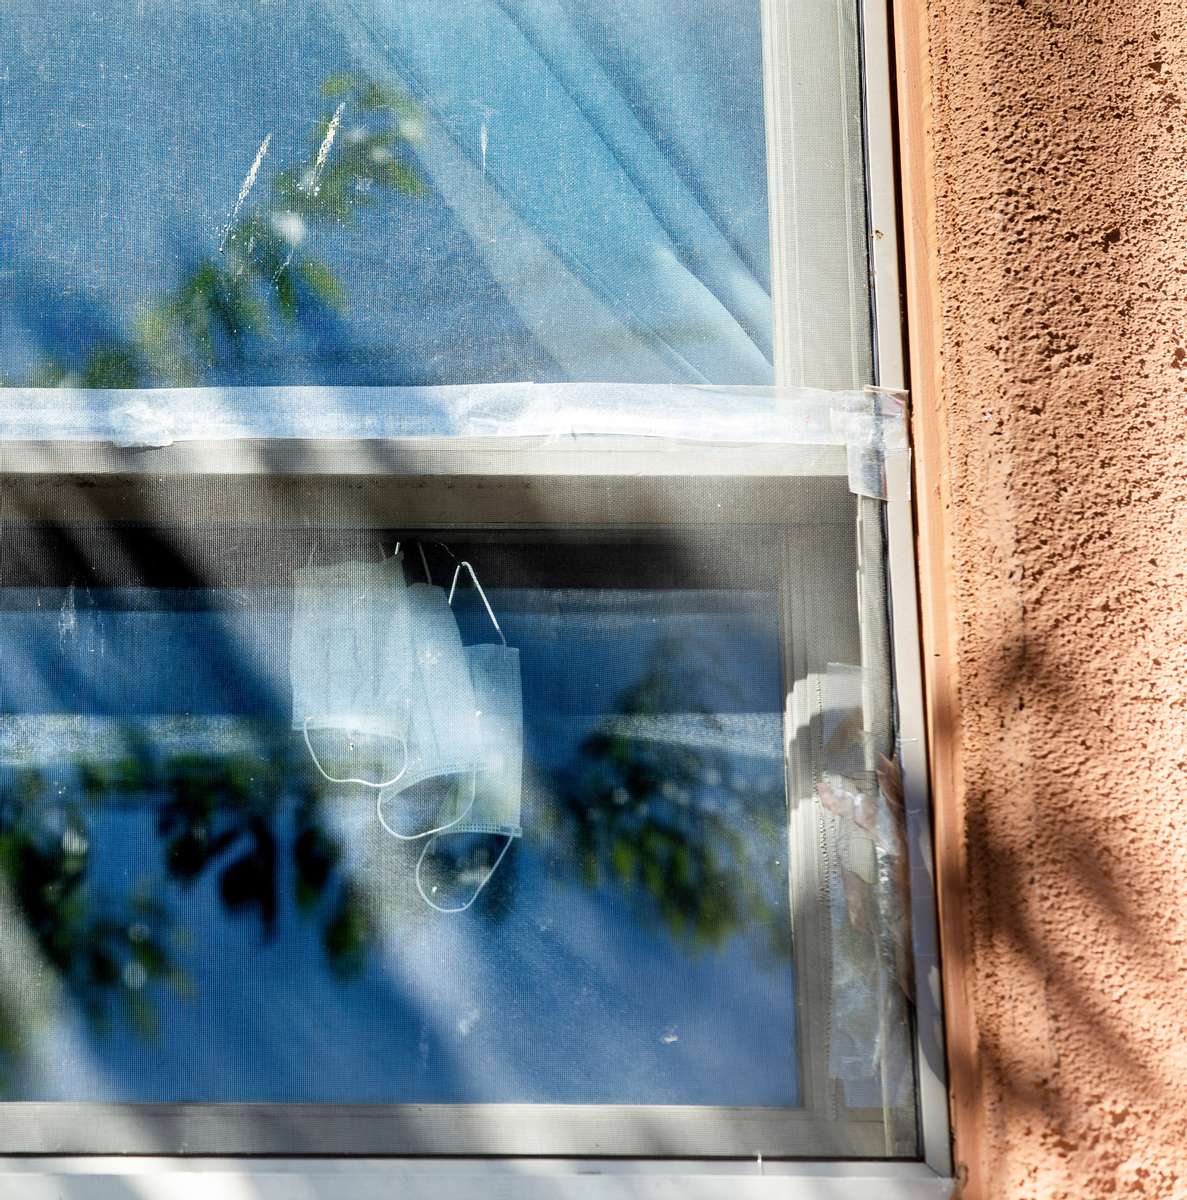 This project was produced in collaboration with the International Community Health Services (ICHS) documenting the effects of Covid-19 on the Chinatown-International District community.photo surgical masks hang in a window in the Chinatown - International District on March 26, 2020 in Seattle, Washington. (photo by Karen Ducey)